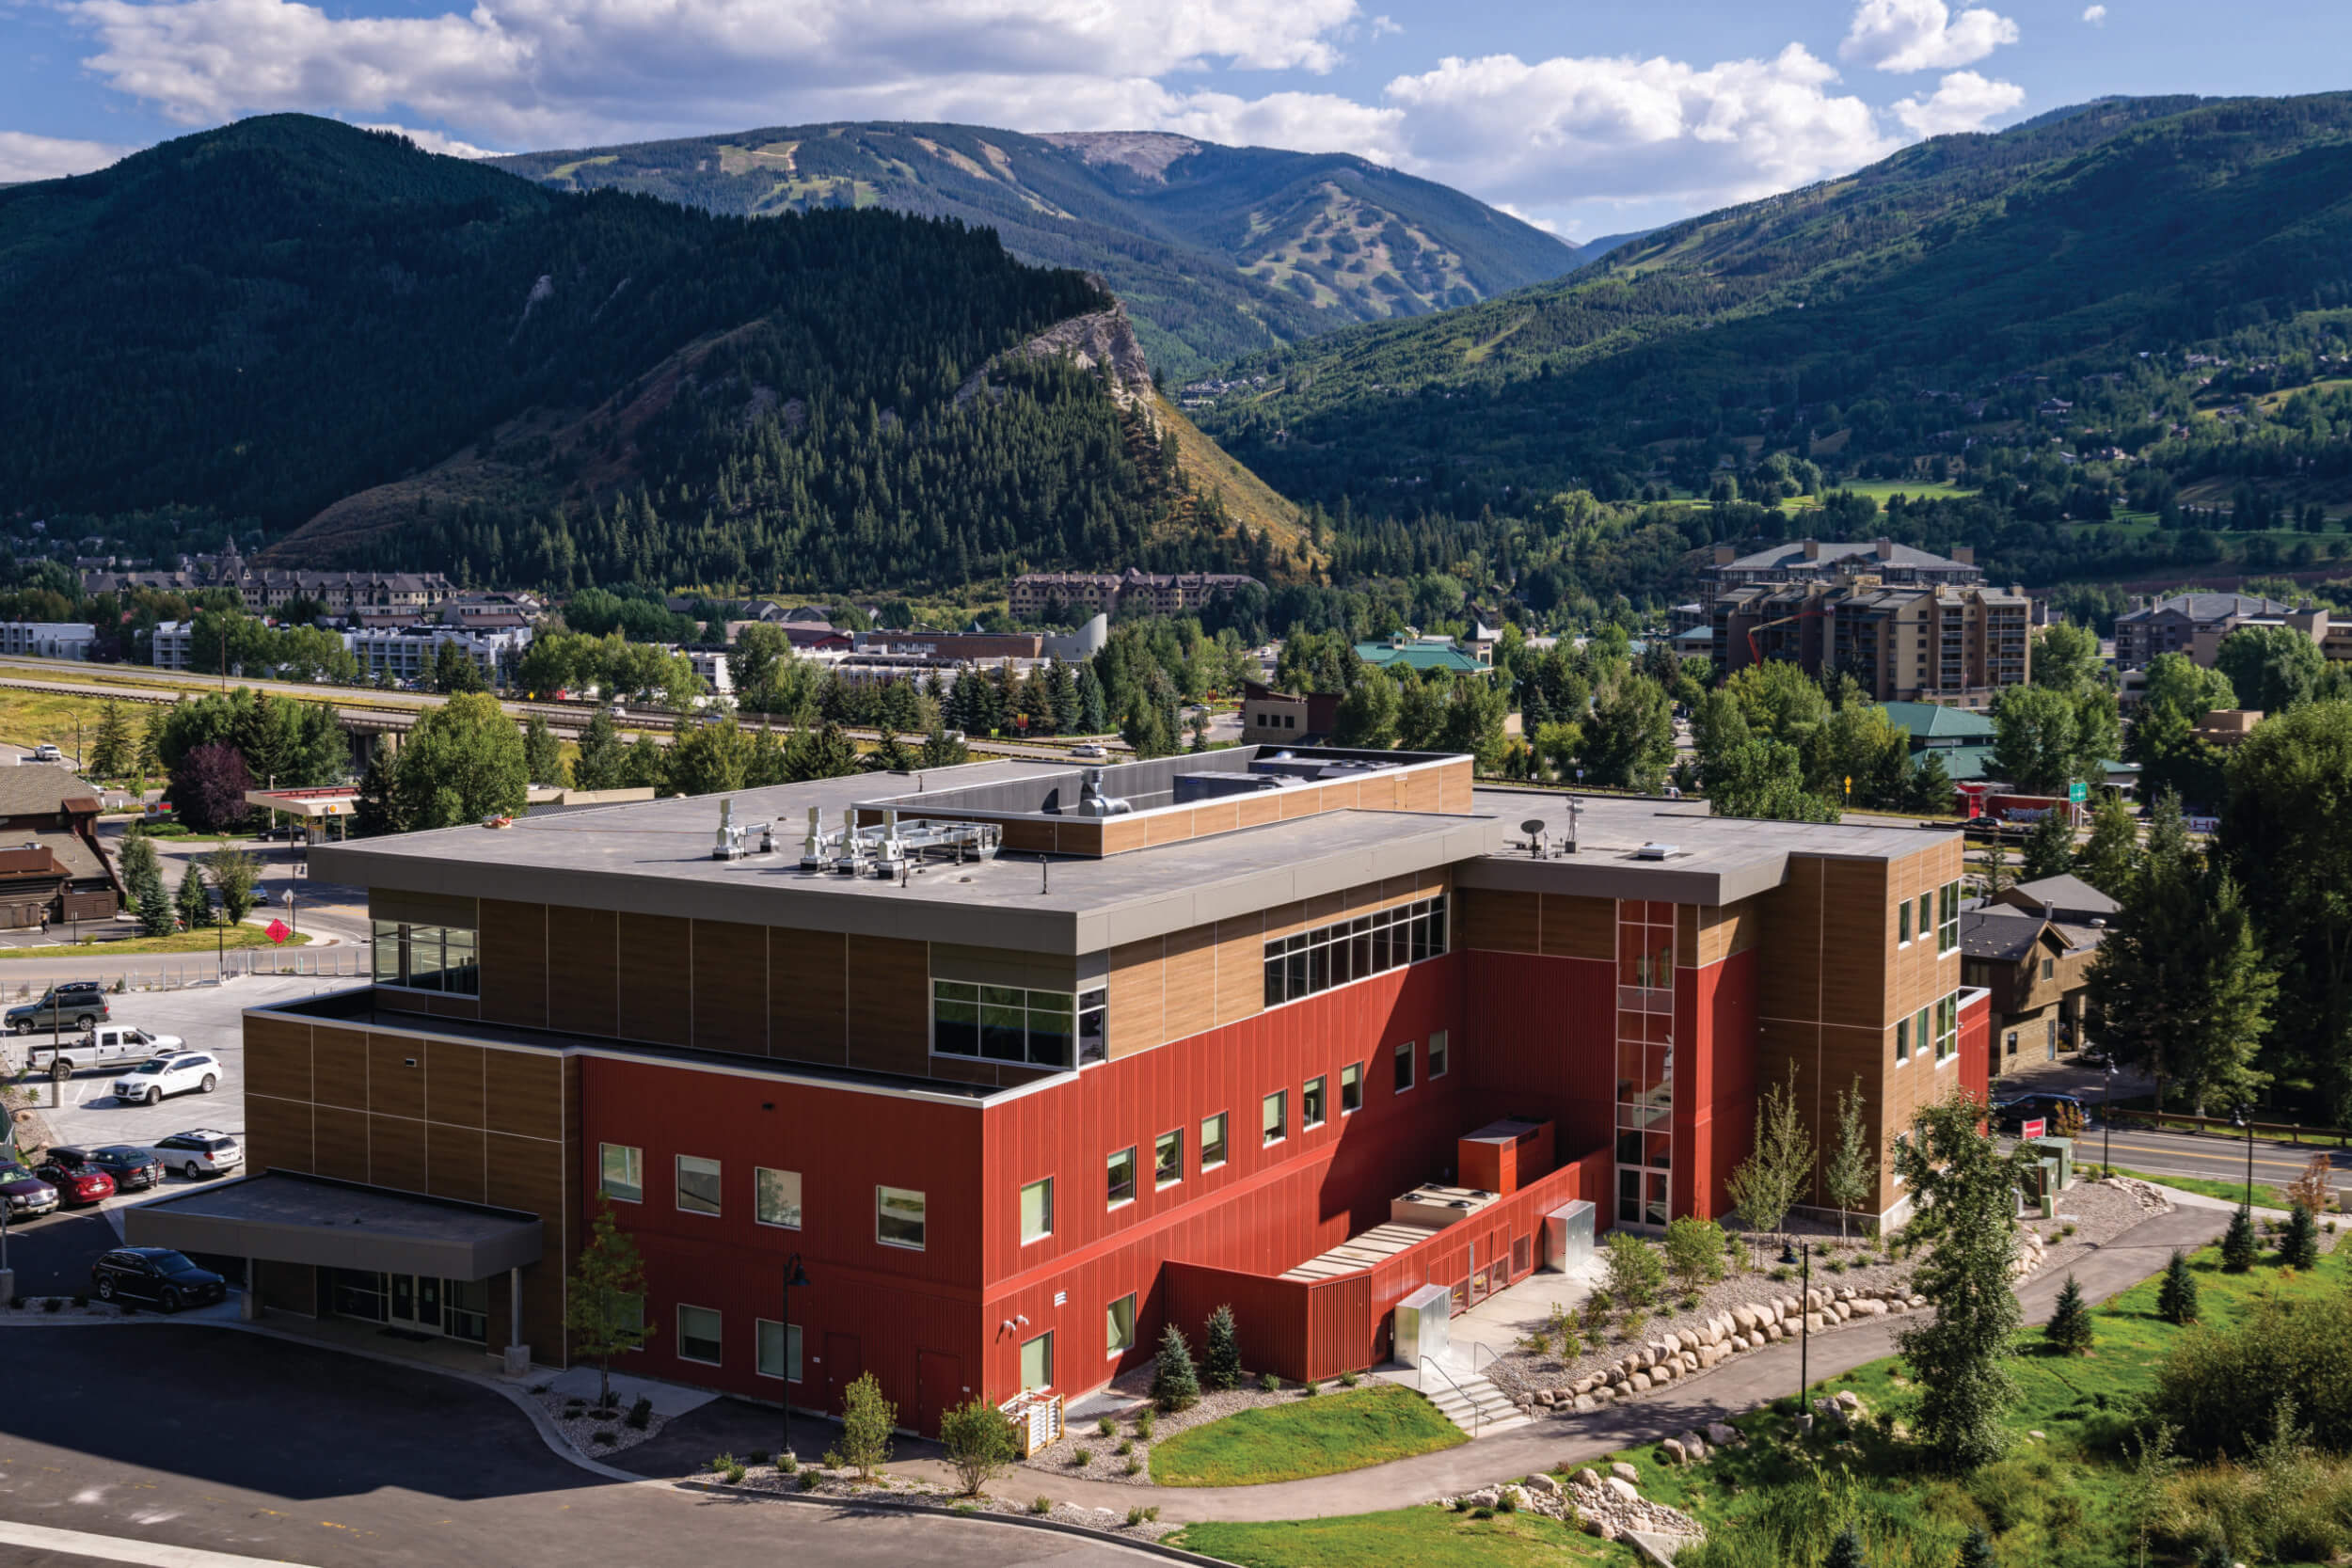 Aerial view of a 3-story medical center with a red and wood exterior and mountains and other buildings in the background